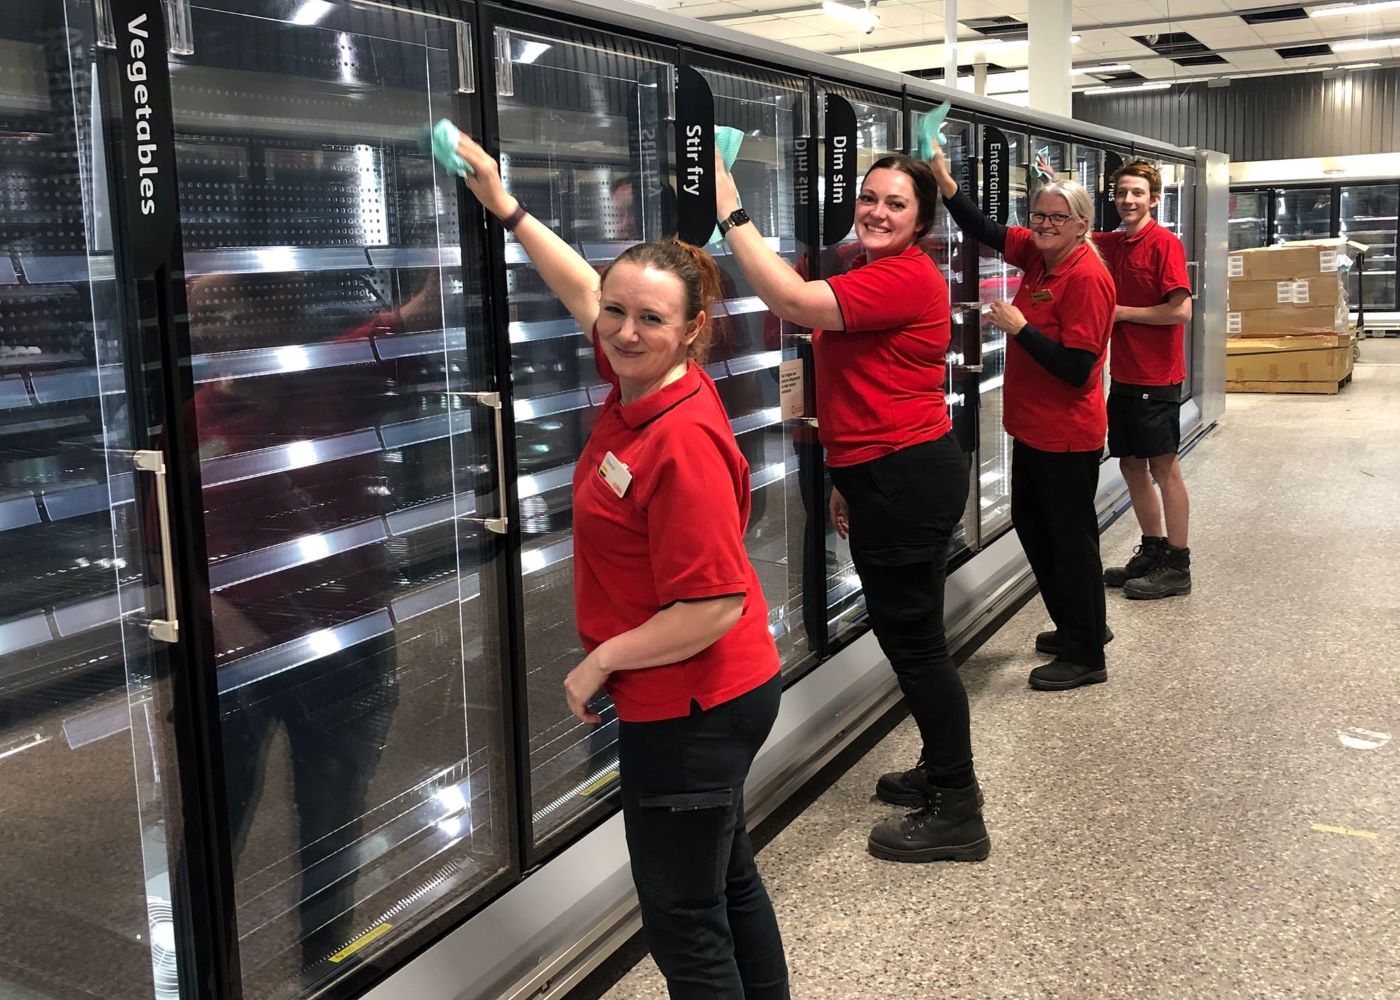 L-R Coles Lismore Store Manager Cheryl, with Carli, Narenea and Cooper helping get the brand new store ready ahead of July 15 opening date